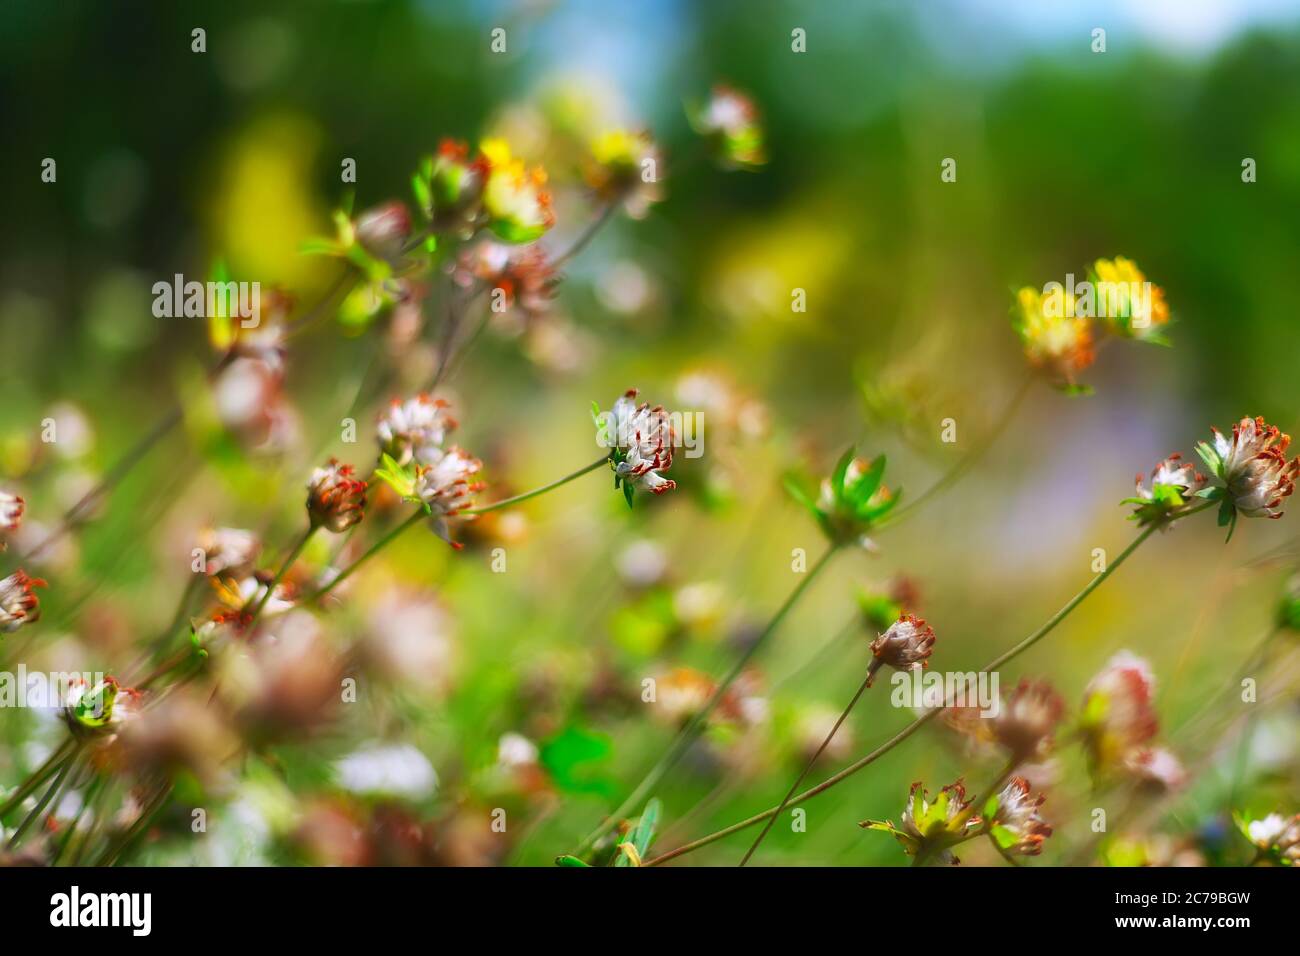 field of clover flowers. shallow depth of field Stock Photo